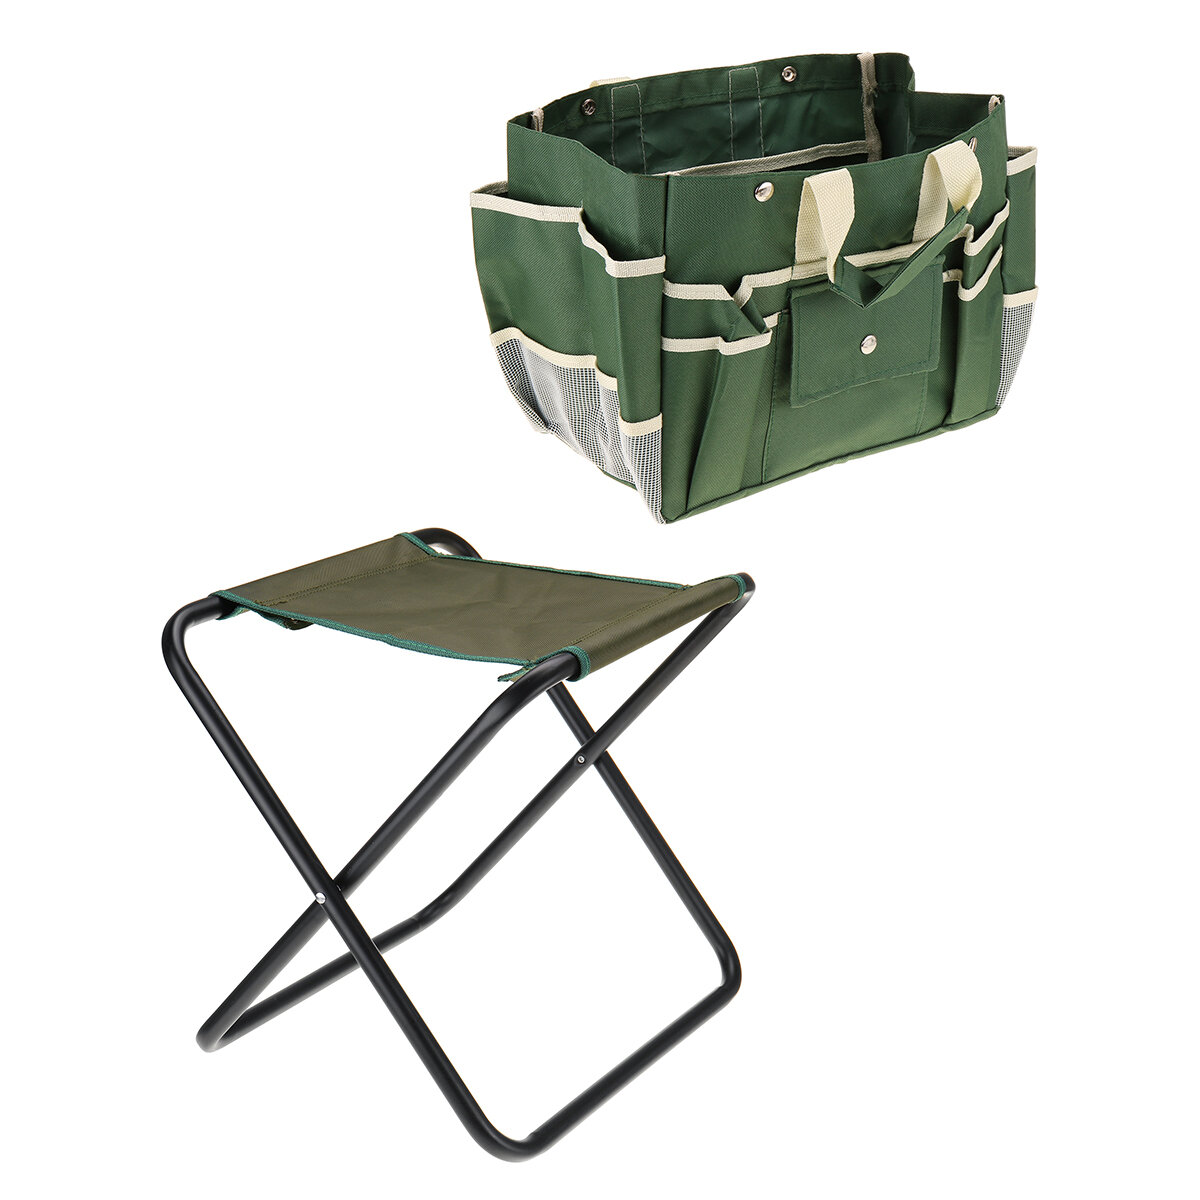 2-in-1 Folding Chair Fishing Seat with Storage Bag Ultralight Aluminum Stool Home Furniture Fishing Camping BBQ Garden Hiking